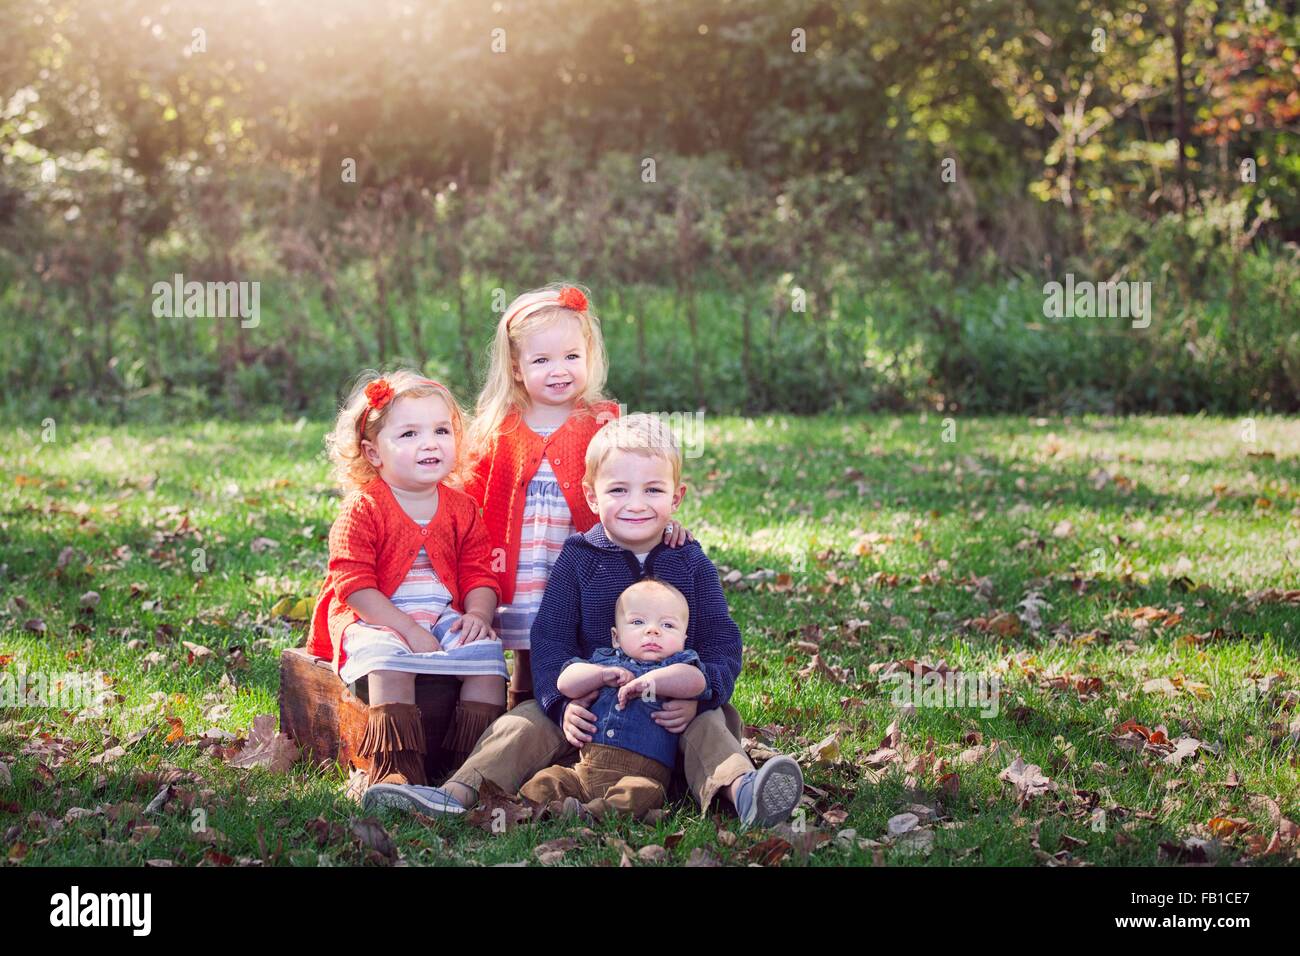 Four children family on autumn leaf covered grass posing for photograph smiling Stock Photo